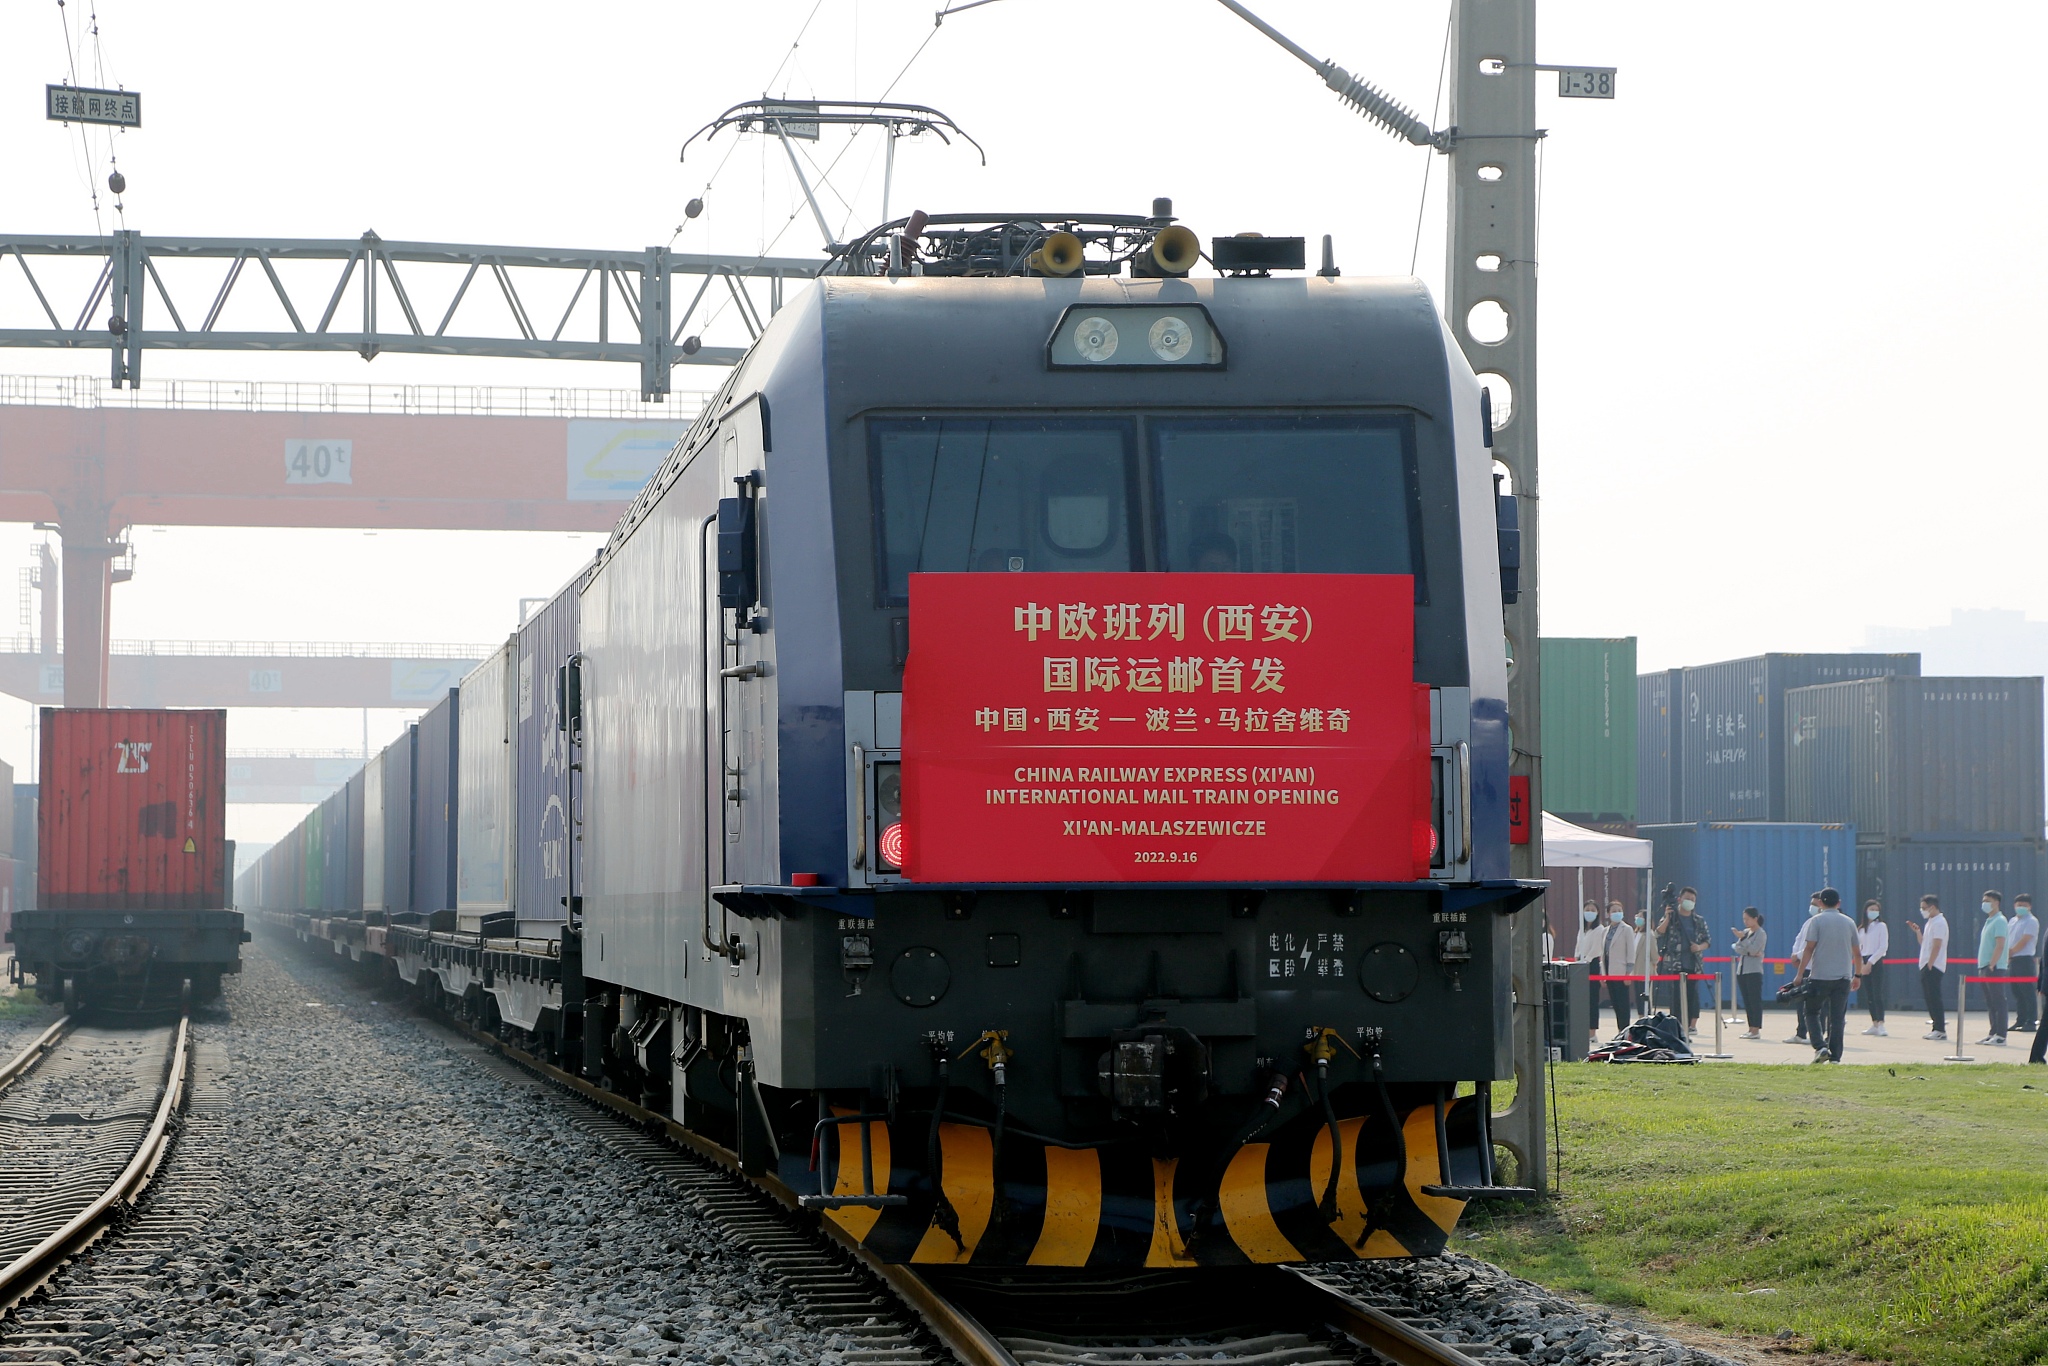 A China Railway Express freight train leaves for Poland's Malaszewicze in Xi'an, northwest China's Shaanxi Province, September 16, 2022. /CFP